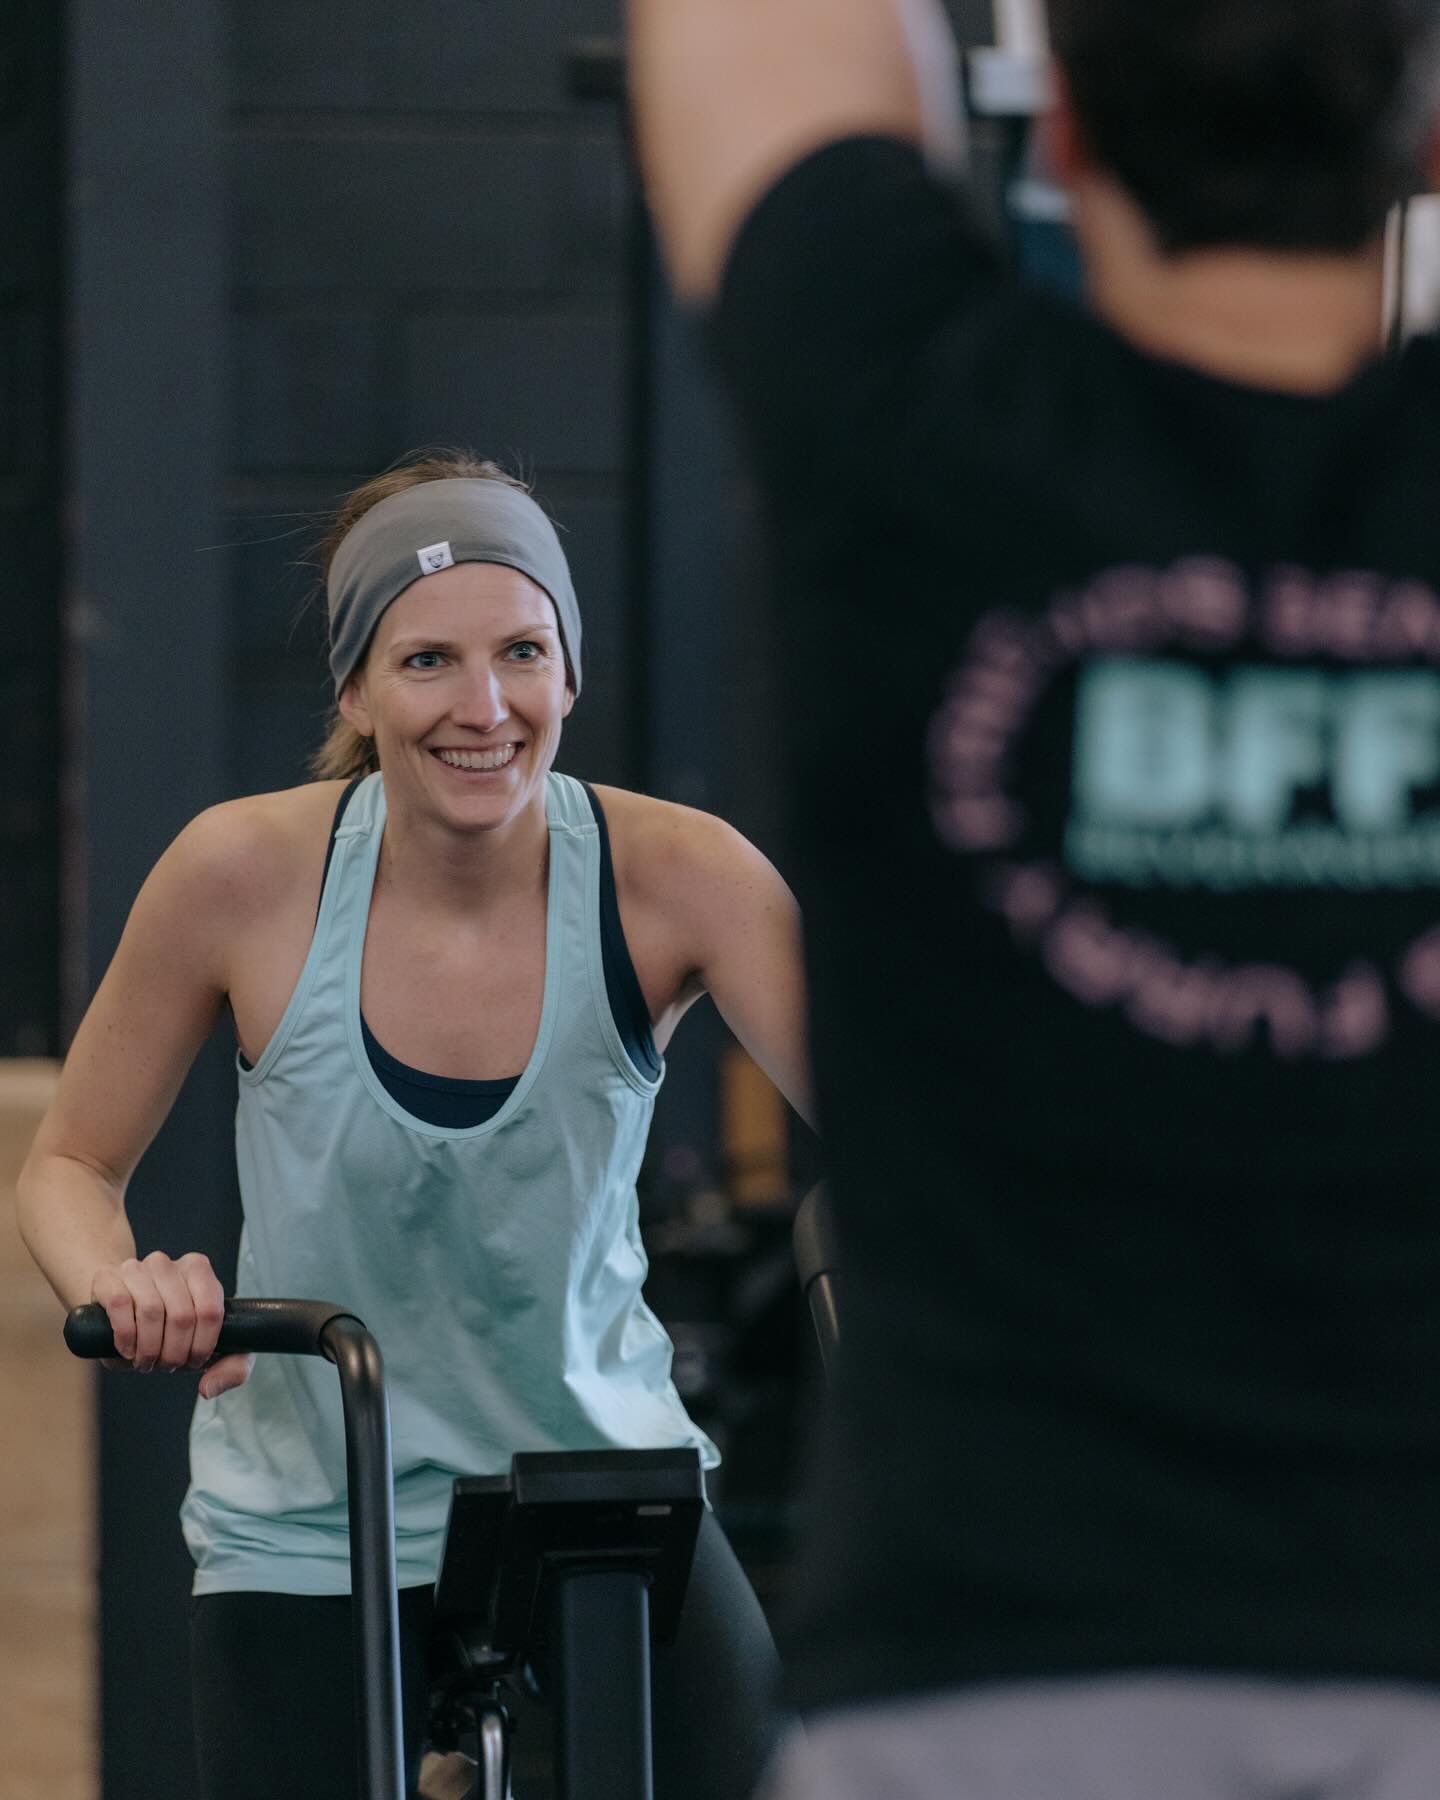 Making fitness fun since 2010.

#CrossFitIndestri
#indestriSTRONG
#weINDESTRUCTIBLE
#CrossFit
#CrossFitCanada
#OURCommunity
#Collingwood
#ThisisYear14
#weCrossFit

Photo: @emmanicholphotography